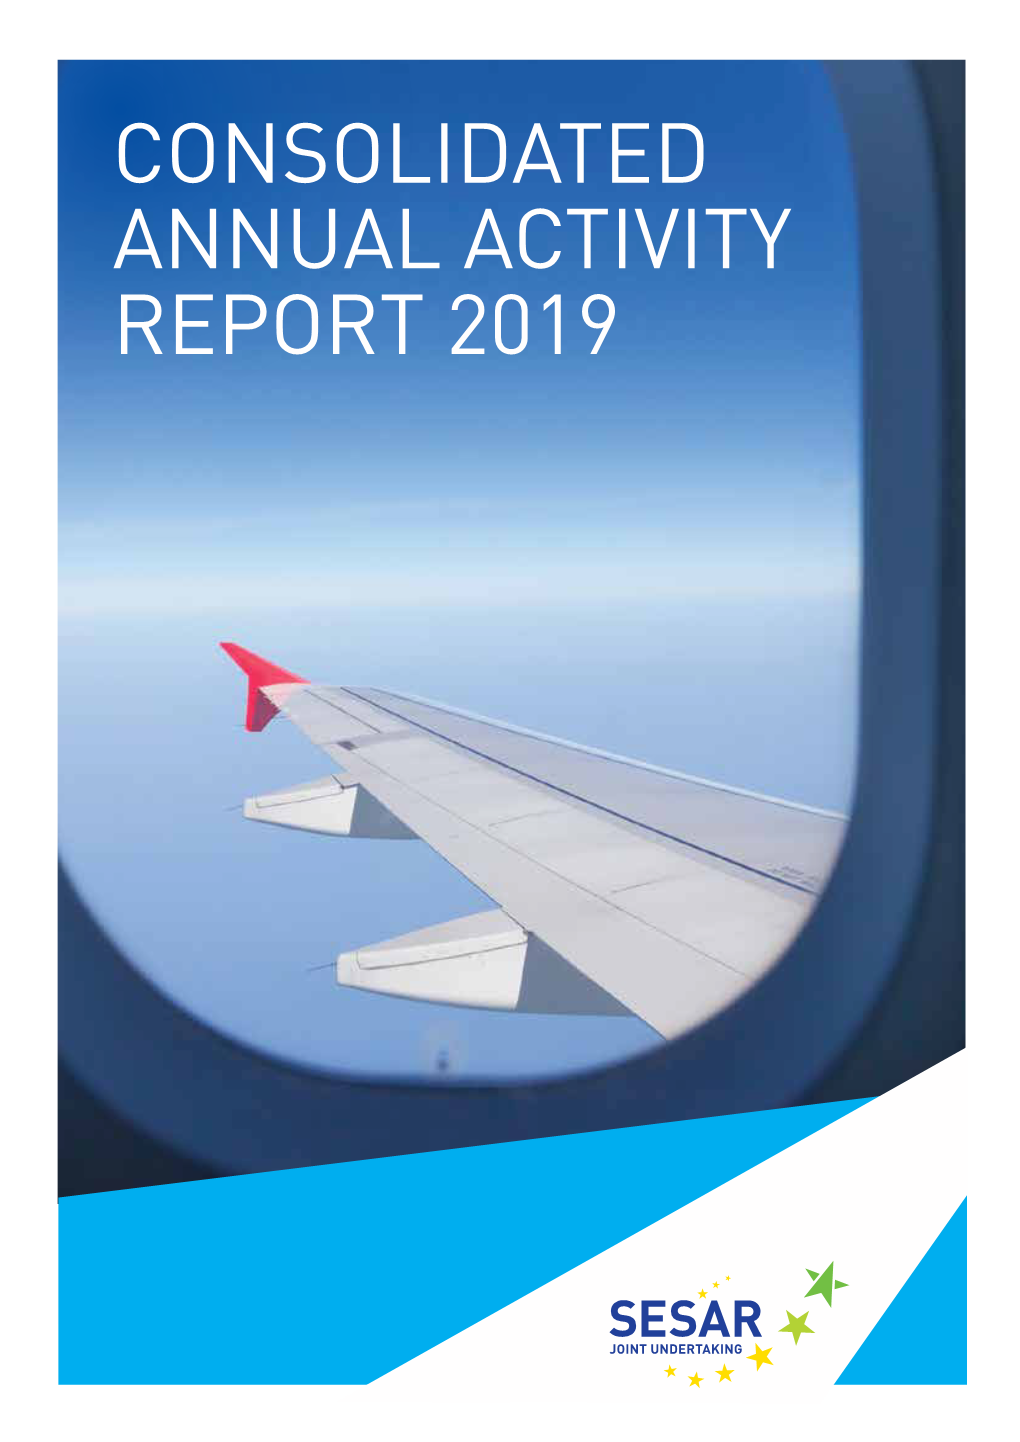 SESAR JU Consolidated Annual Activity Report 2019